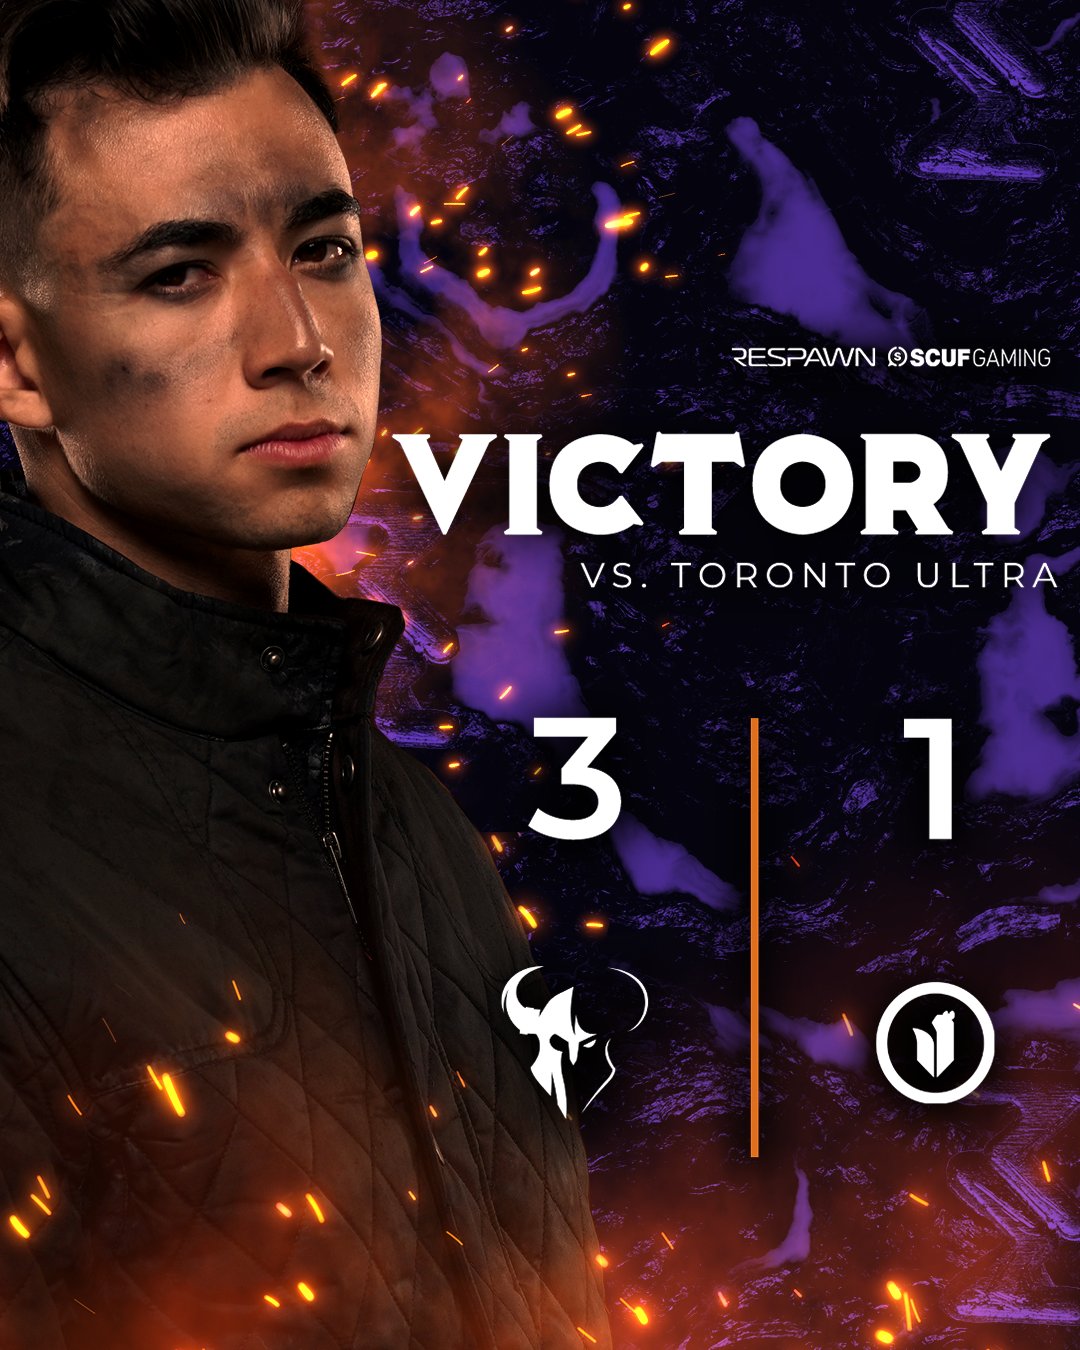 Minnesota Rokkr took a 3-1 win against Toronto Ultra during the Major I Qualifiers.